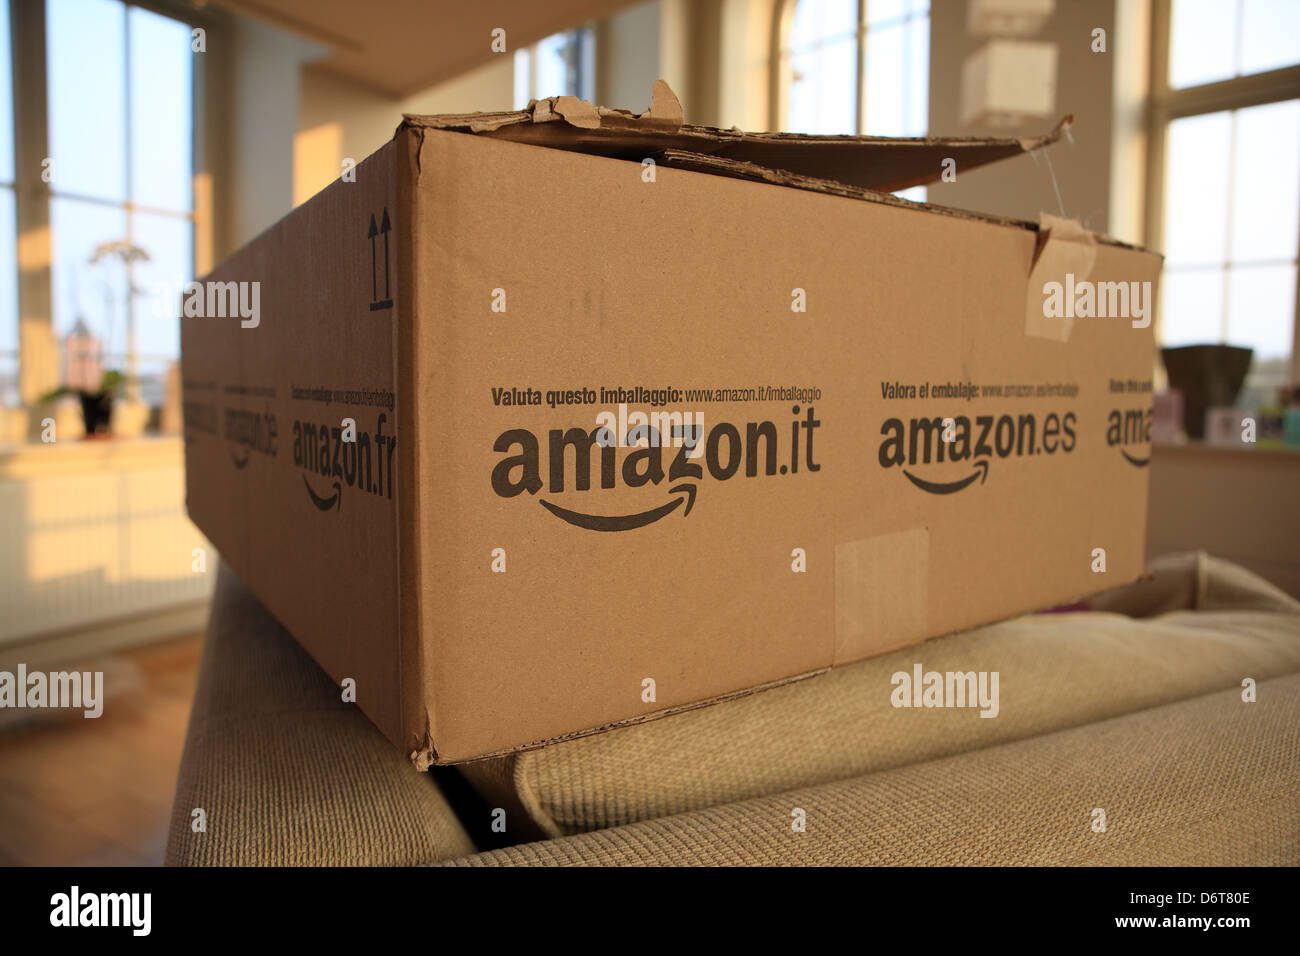 Amazon delivery to the home. Large Amazon box in lounge showing the ease of internet shopping from online retailers Stock Photo